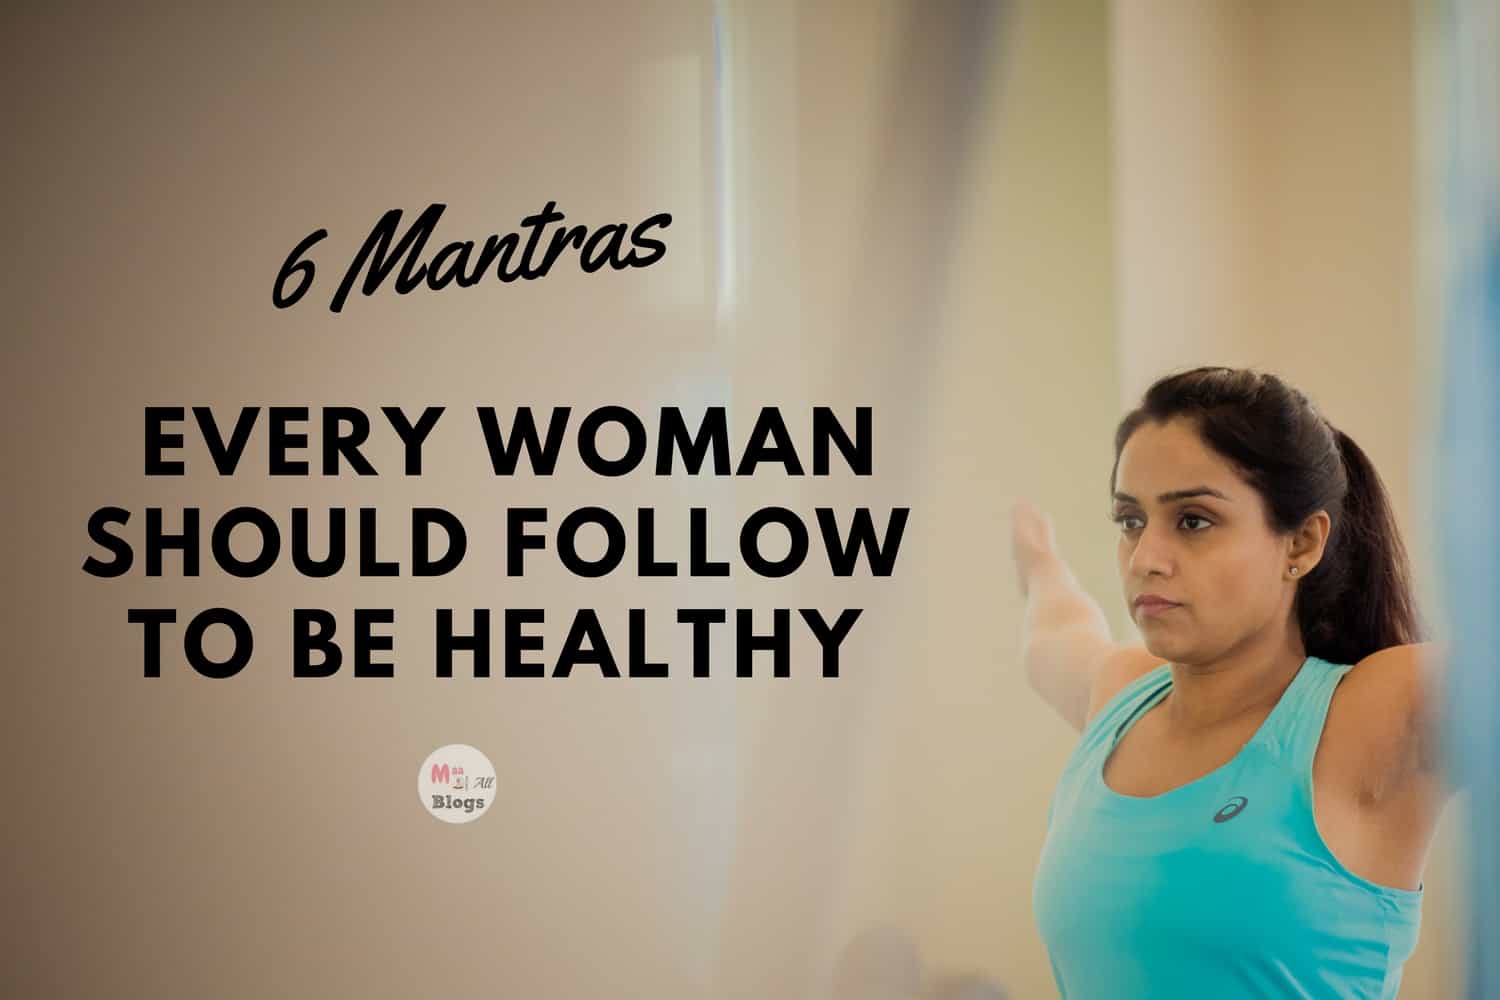 6 Mantras Every Woman Should Follow To Be Healthy